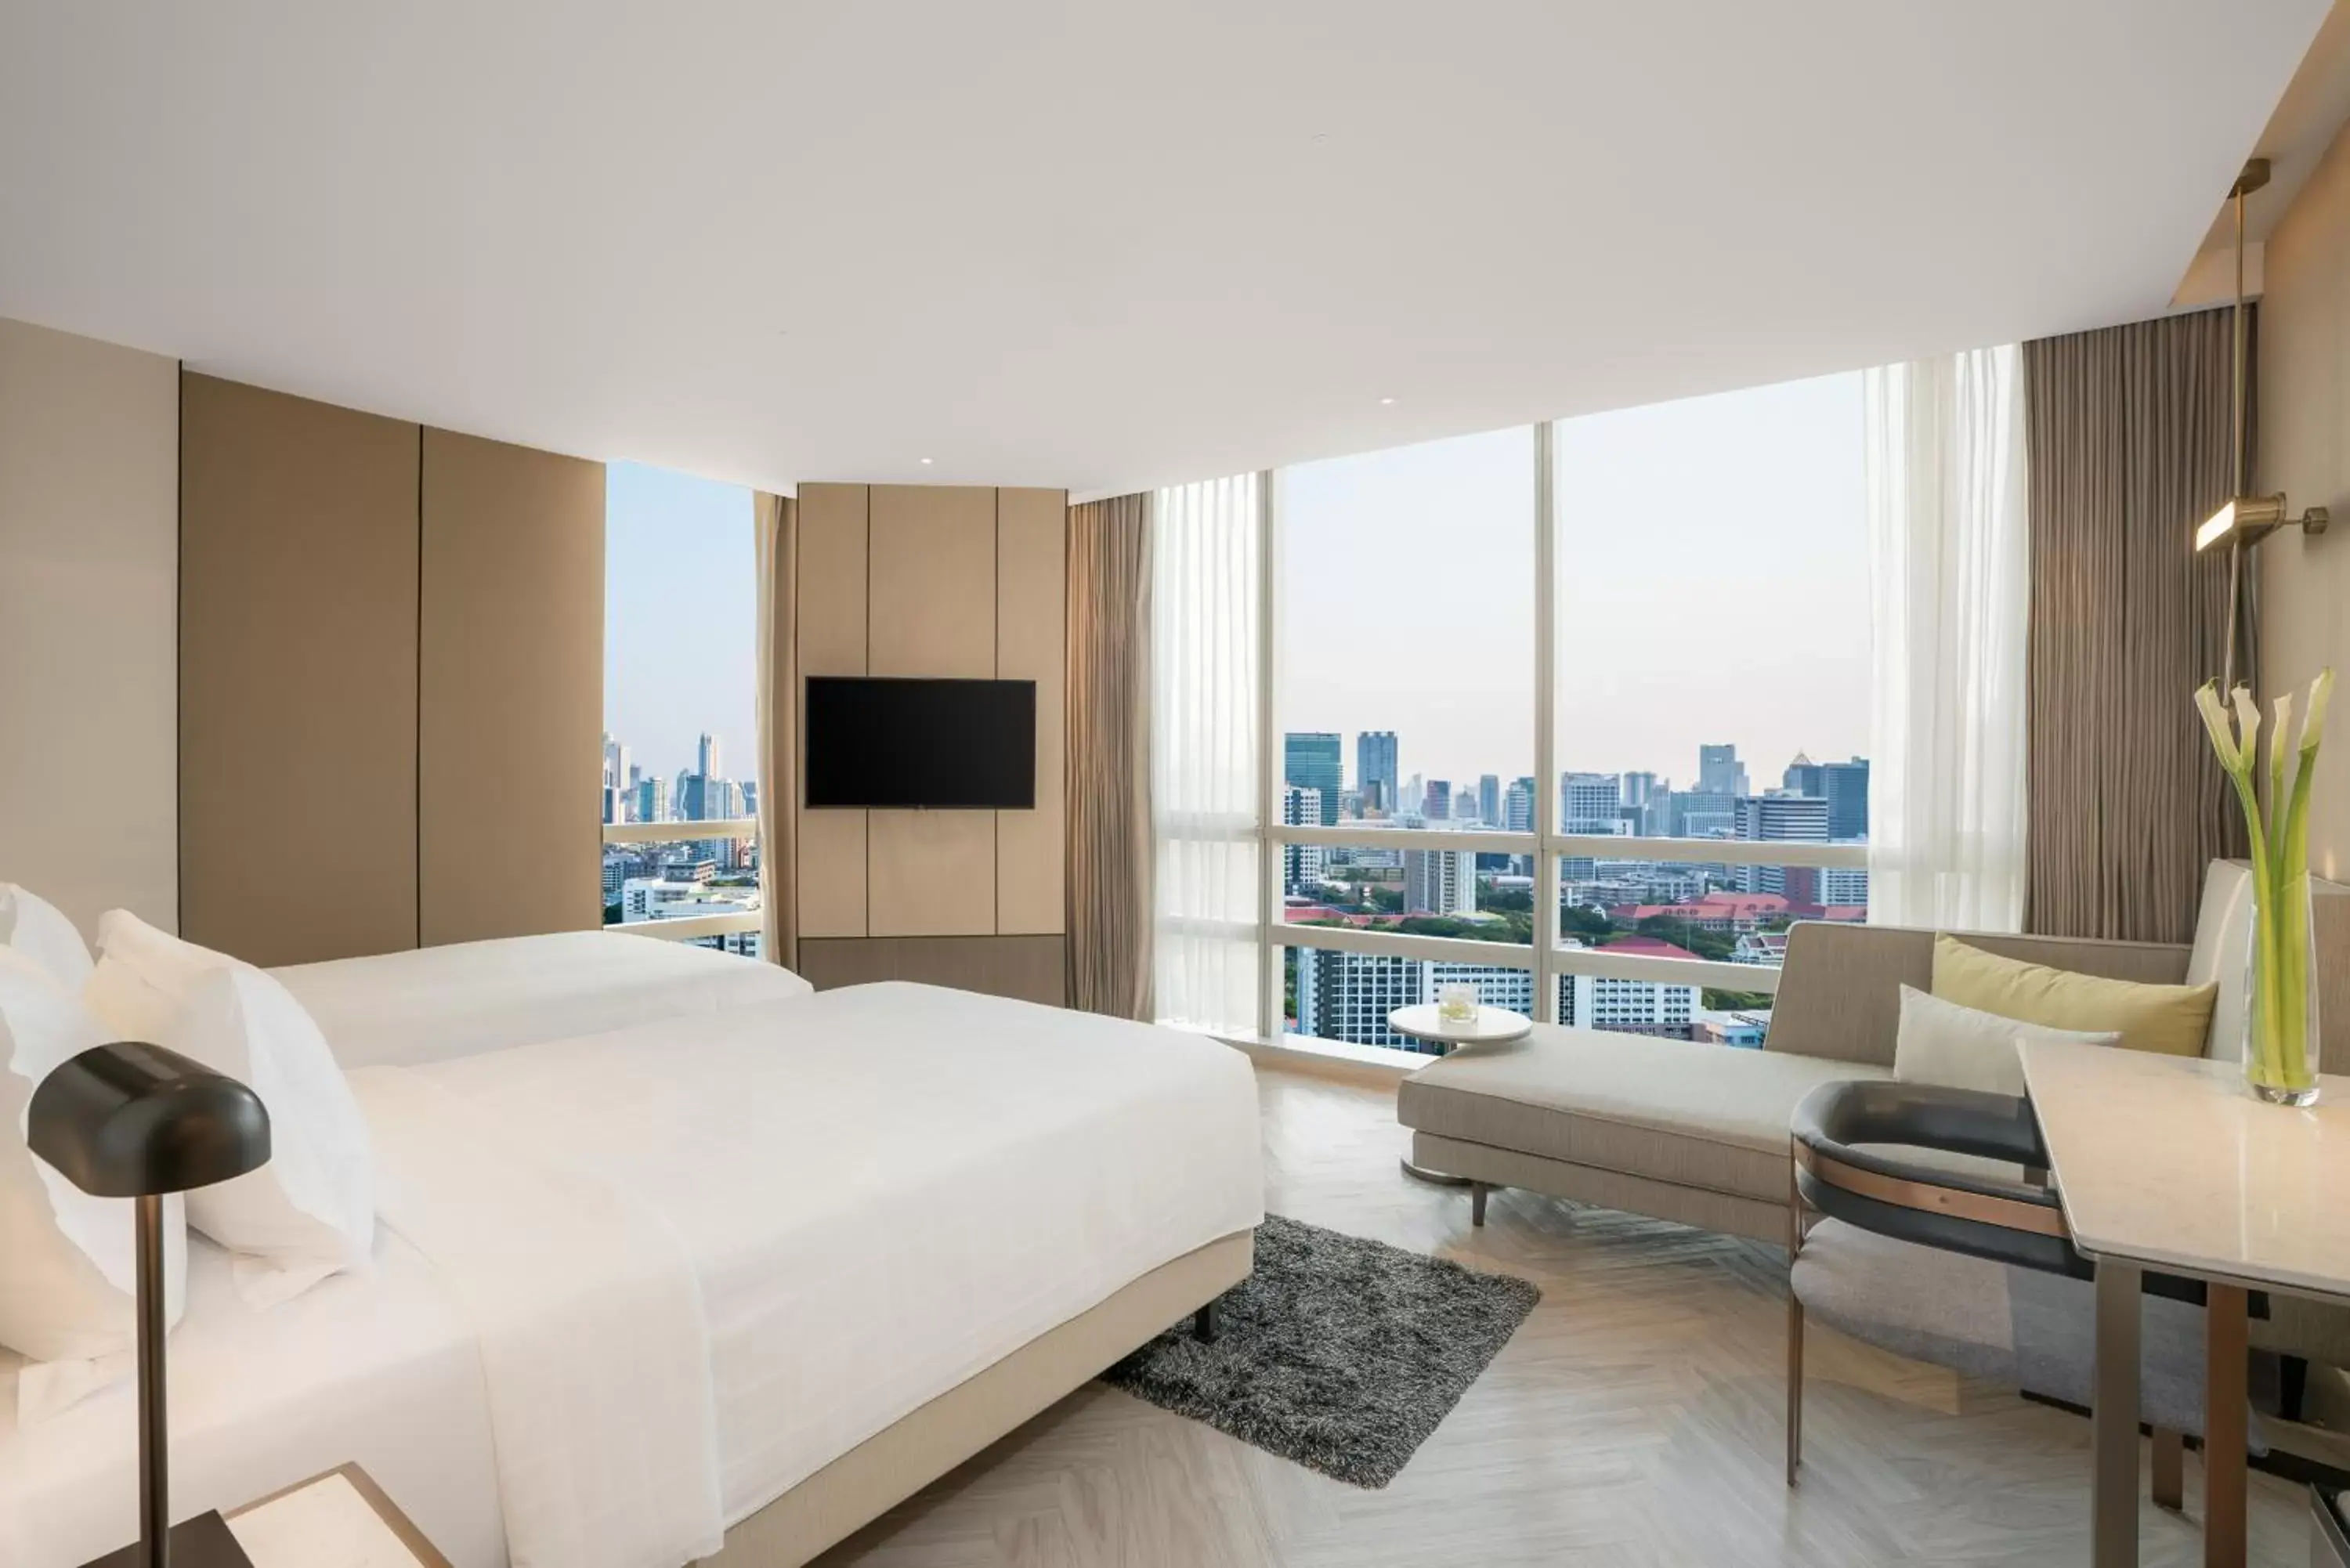 Grand Deluxe Corner Twin Room in Pathumwan Princess Hotel - SHA Extra Plus Certified